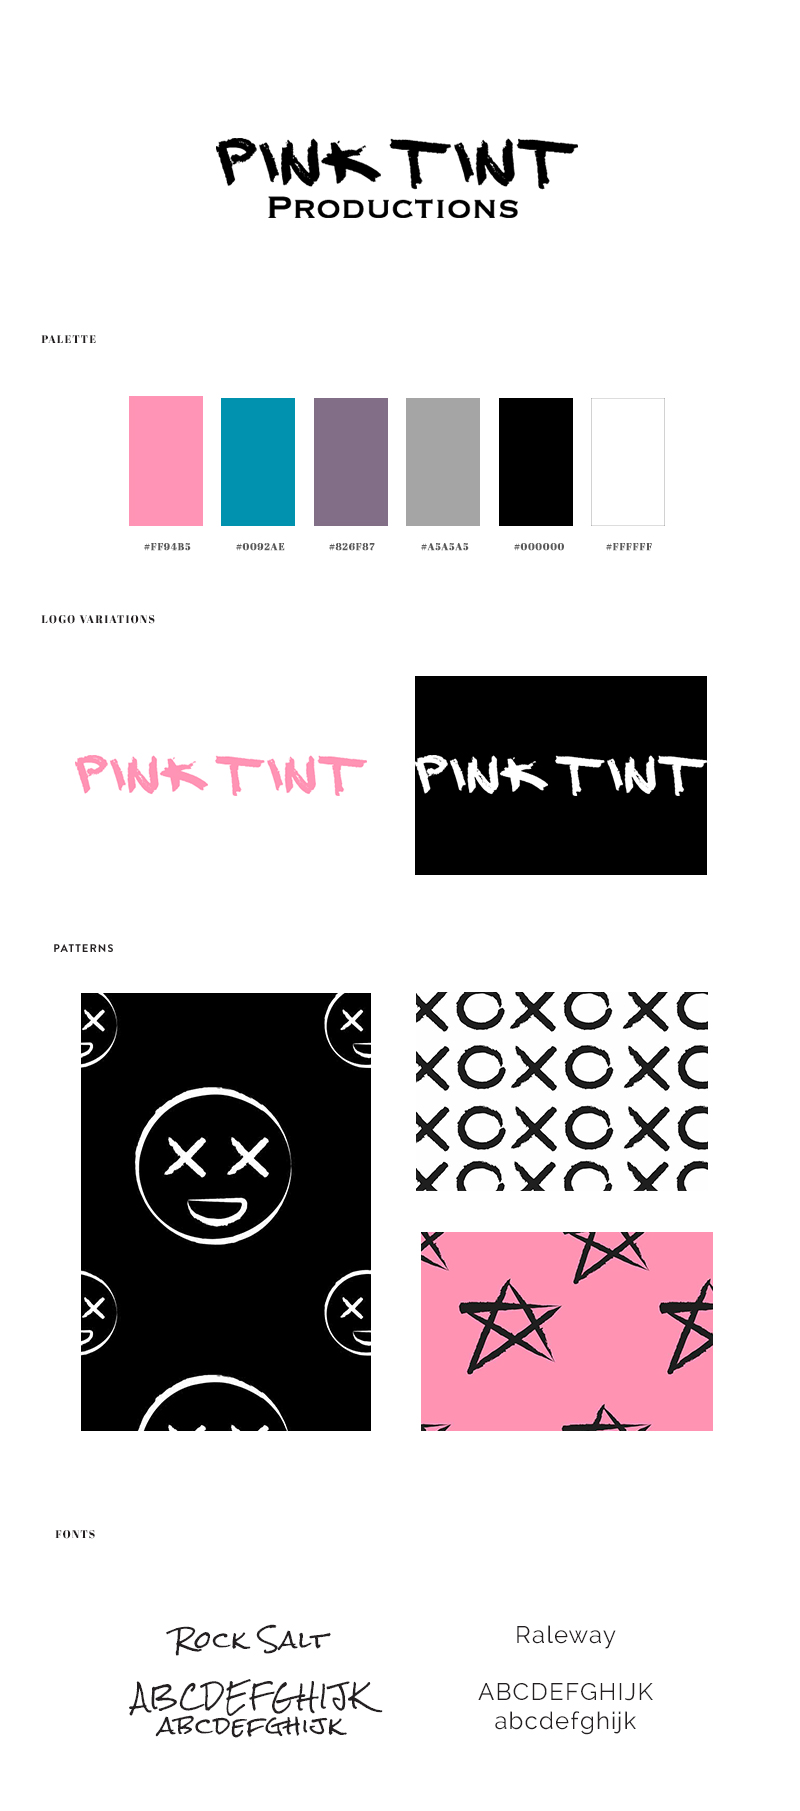 Brand x Web Design for Pink Tint - Brand Board